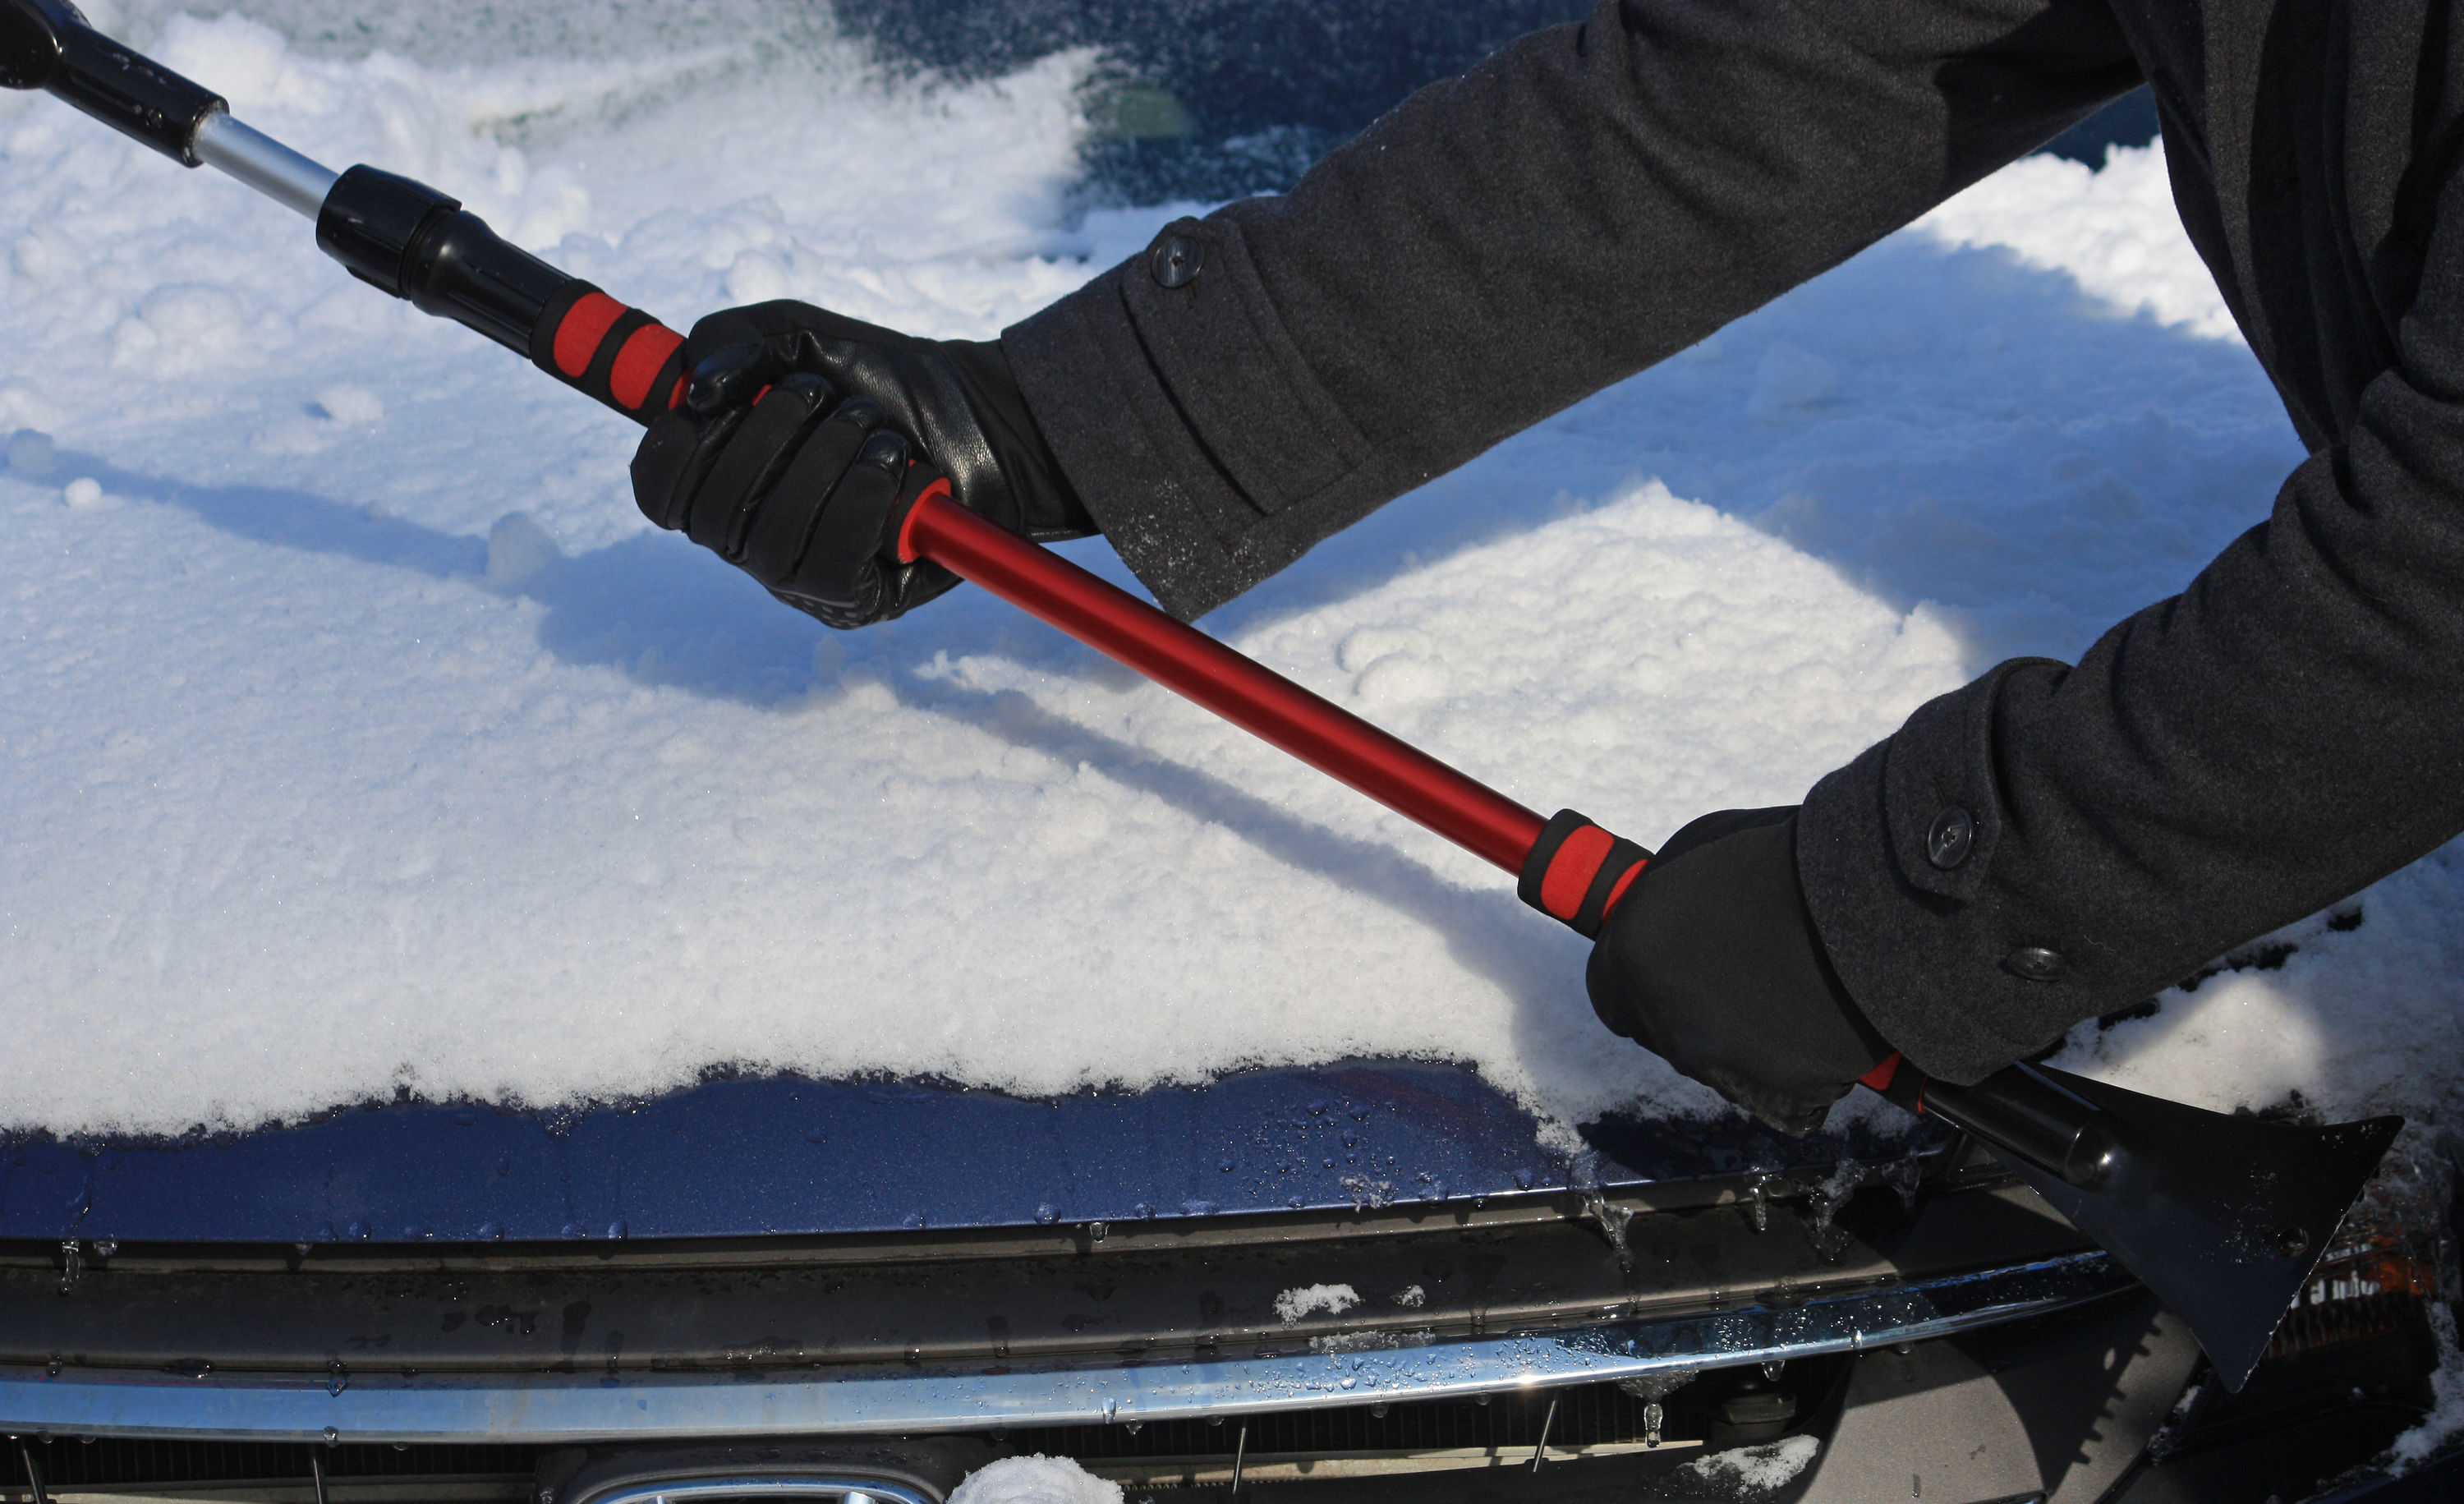 Snow Moover 58 Extendable Snow Brush with Squeegee, Ice Scraper